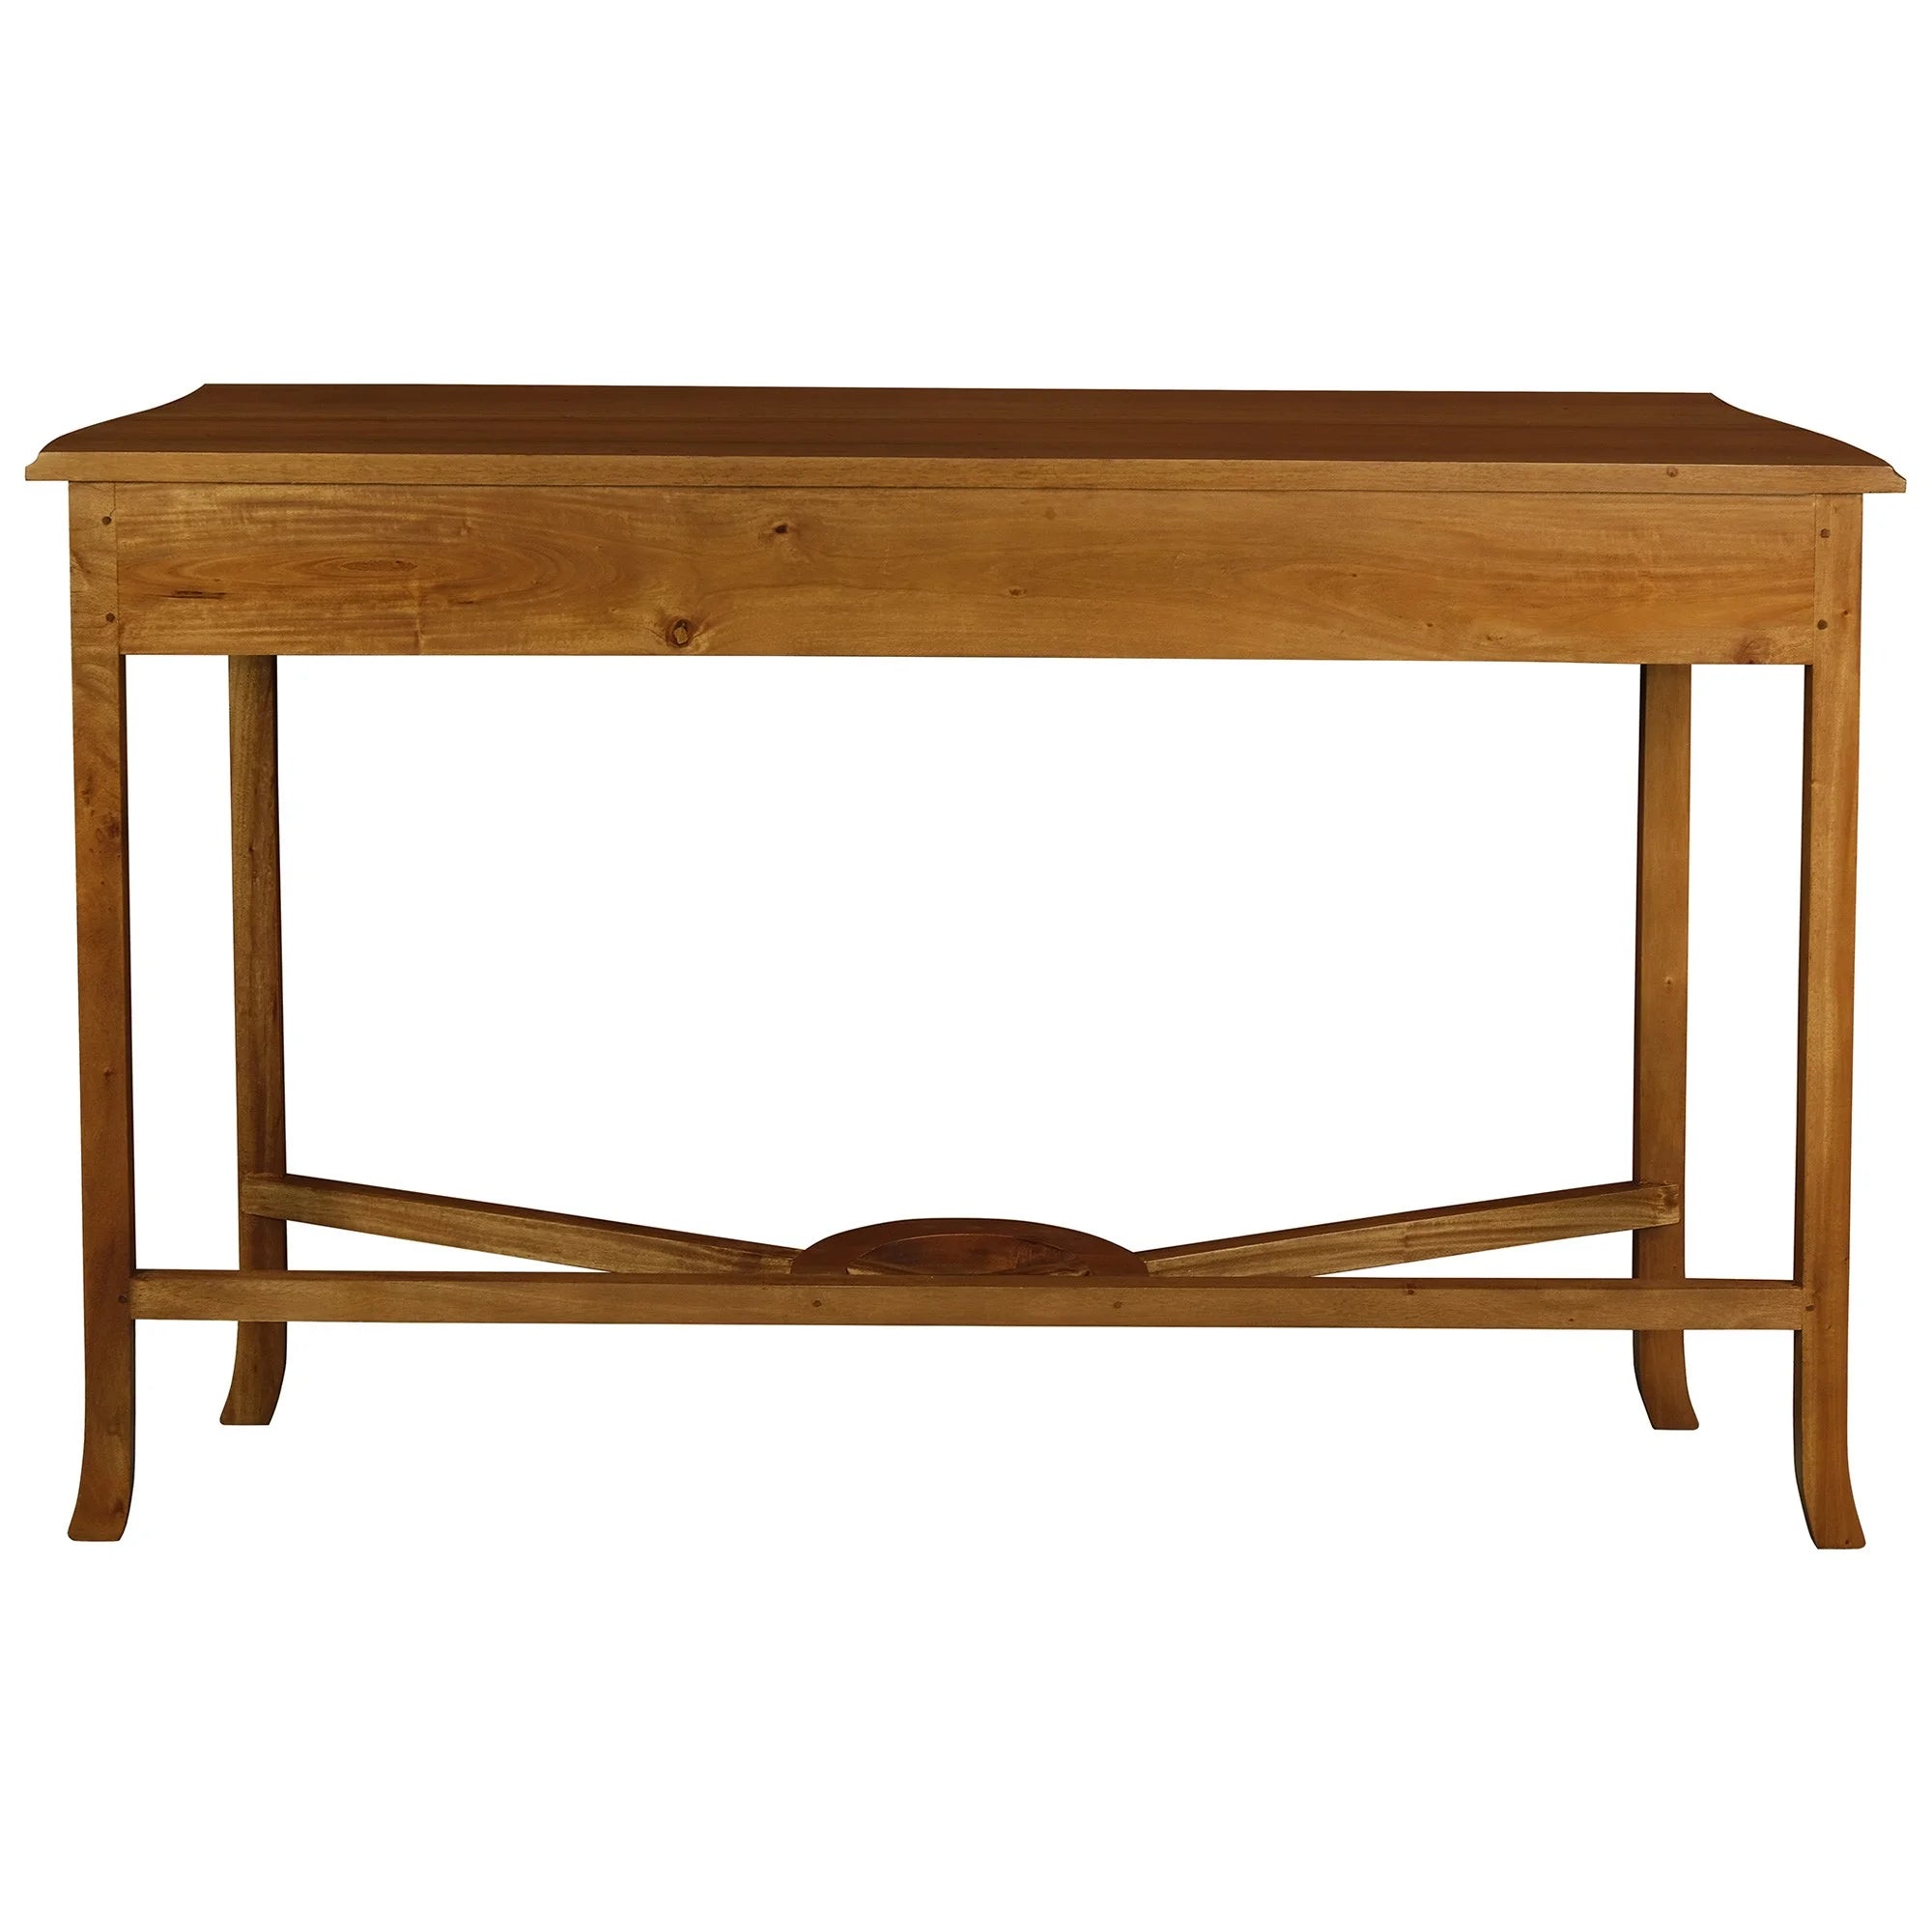 Jepara Handcarved Timber Console in Light Pecan - 120cm - Notbrand